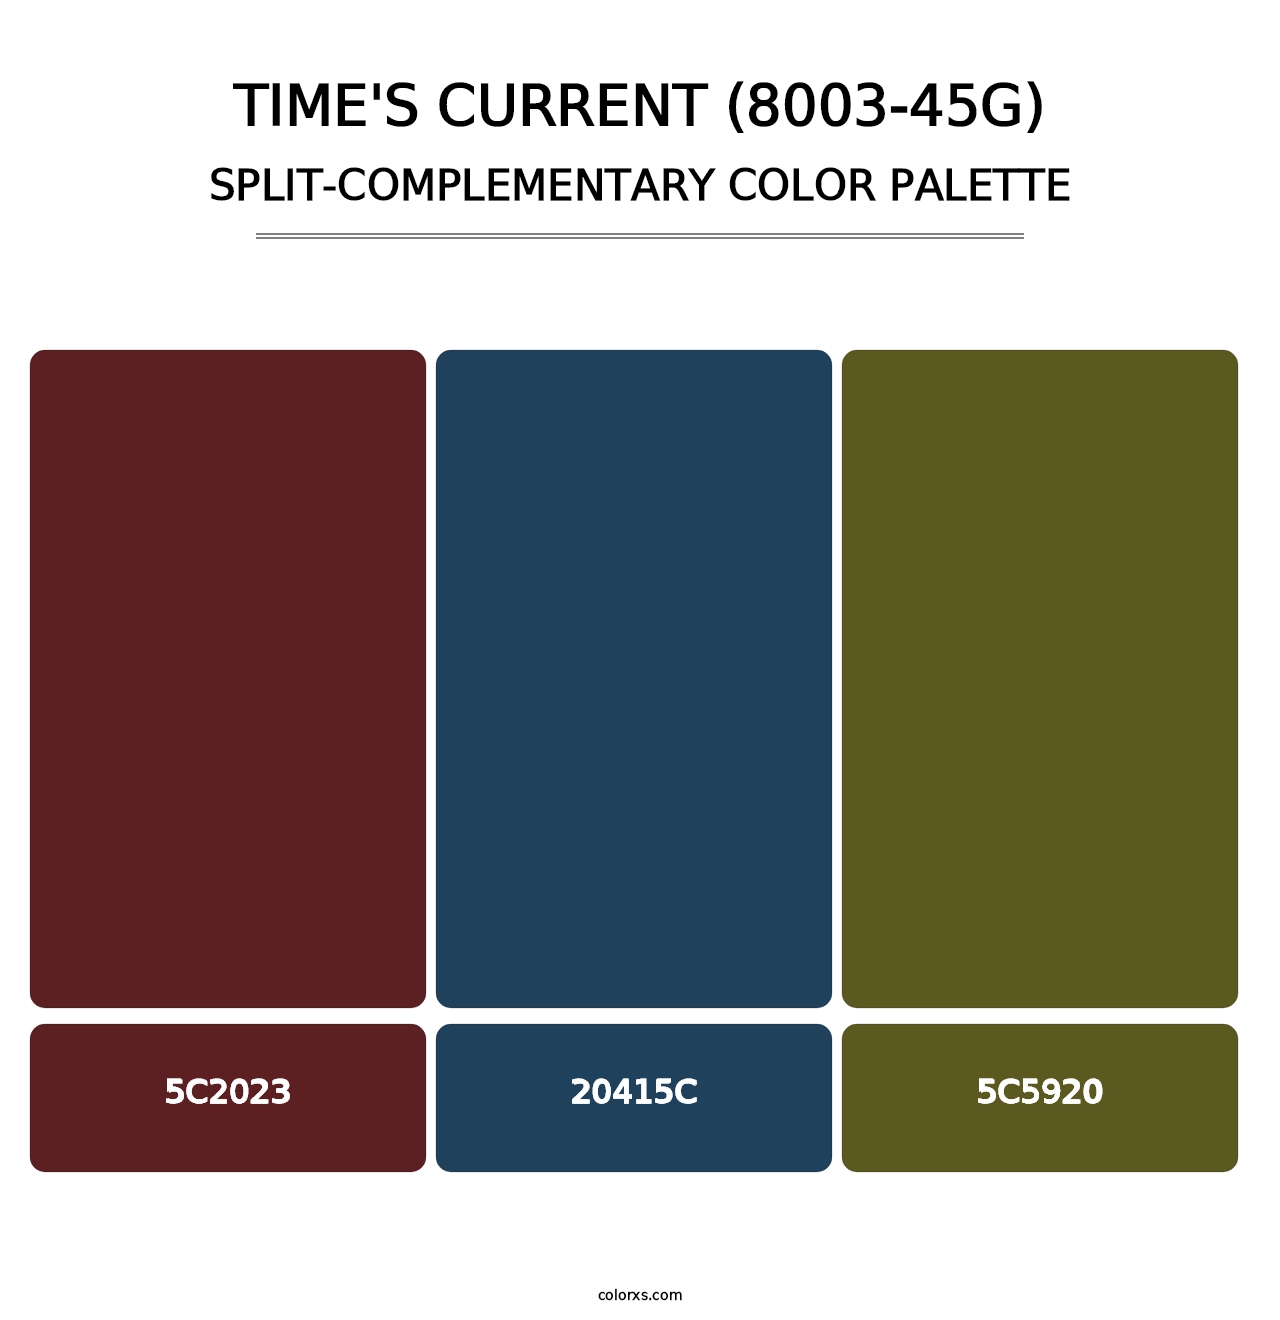 Time's Current (8003-45G) - Split-Complementary Color Palette